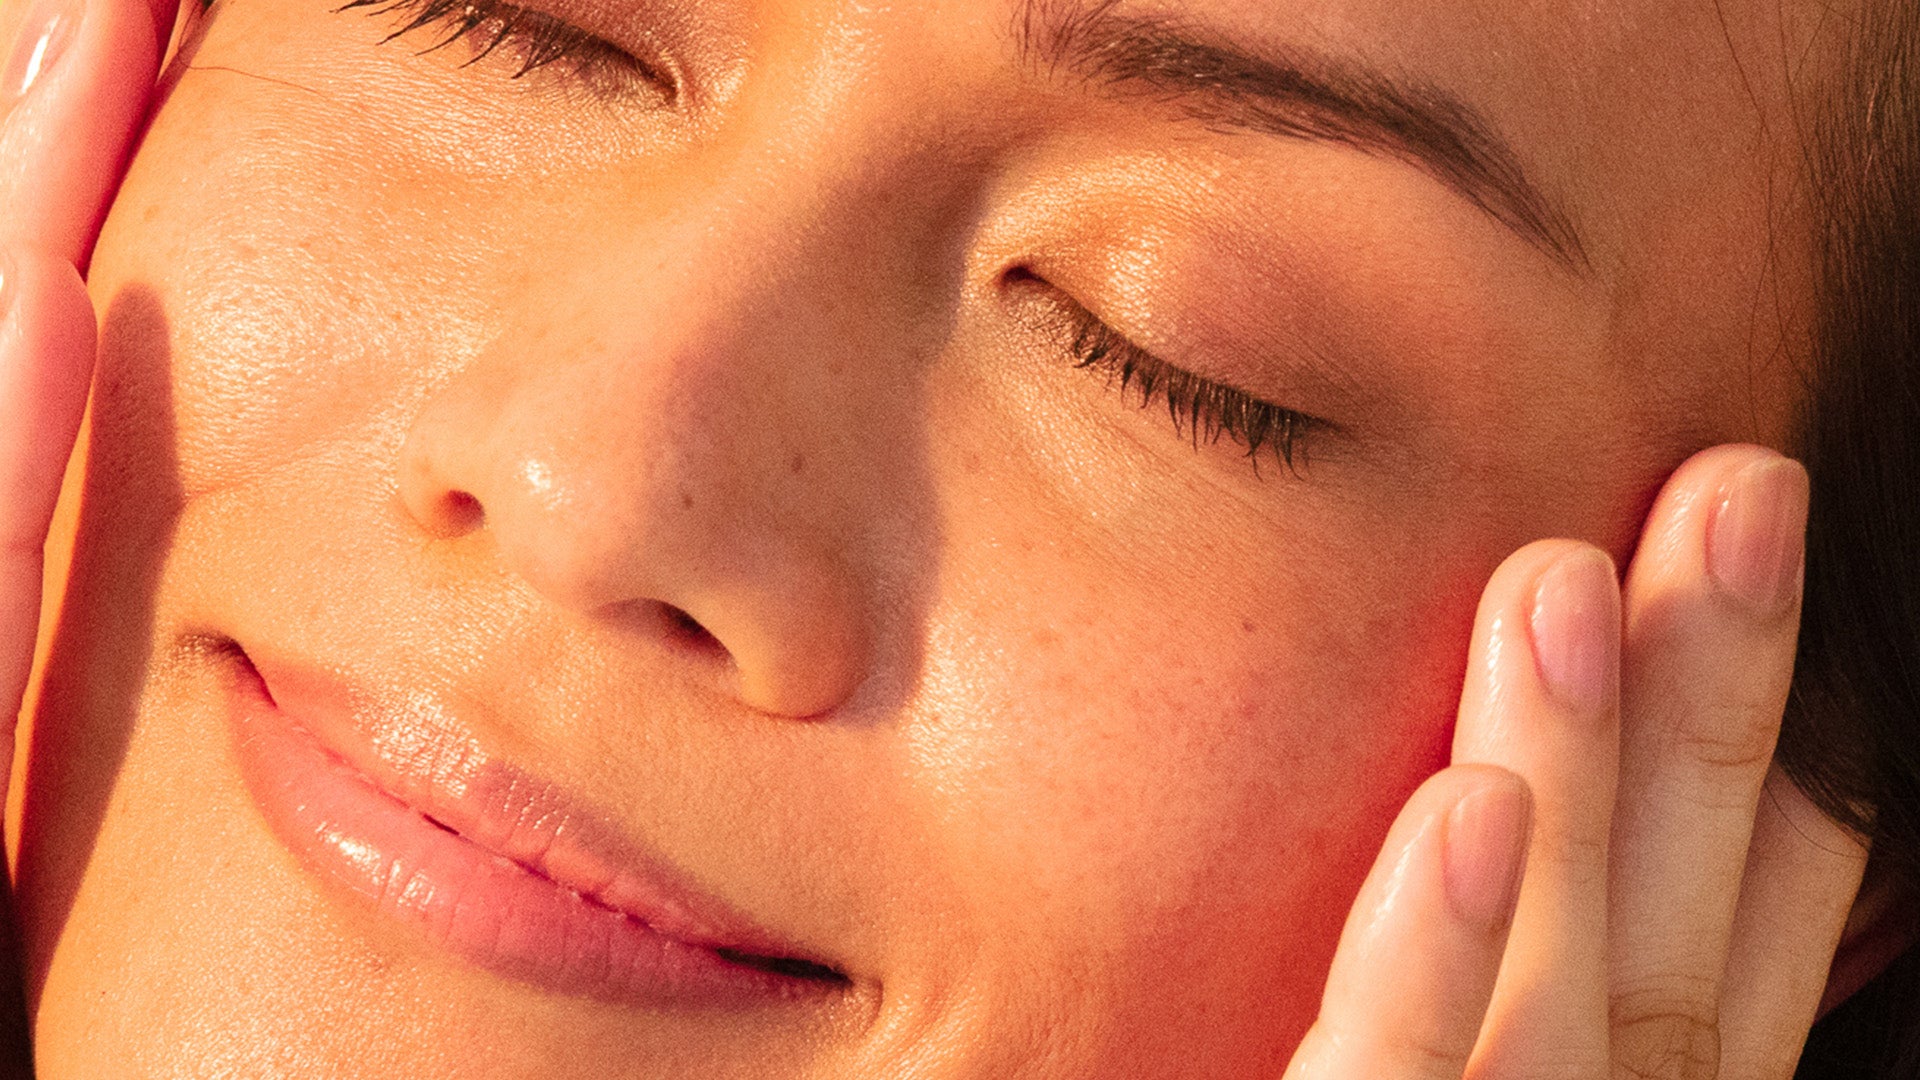 DOWN TO THE PORE – 9 FACTS YOU NEED TO KNOW